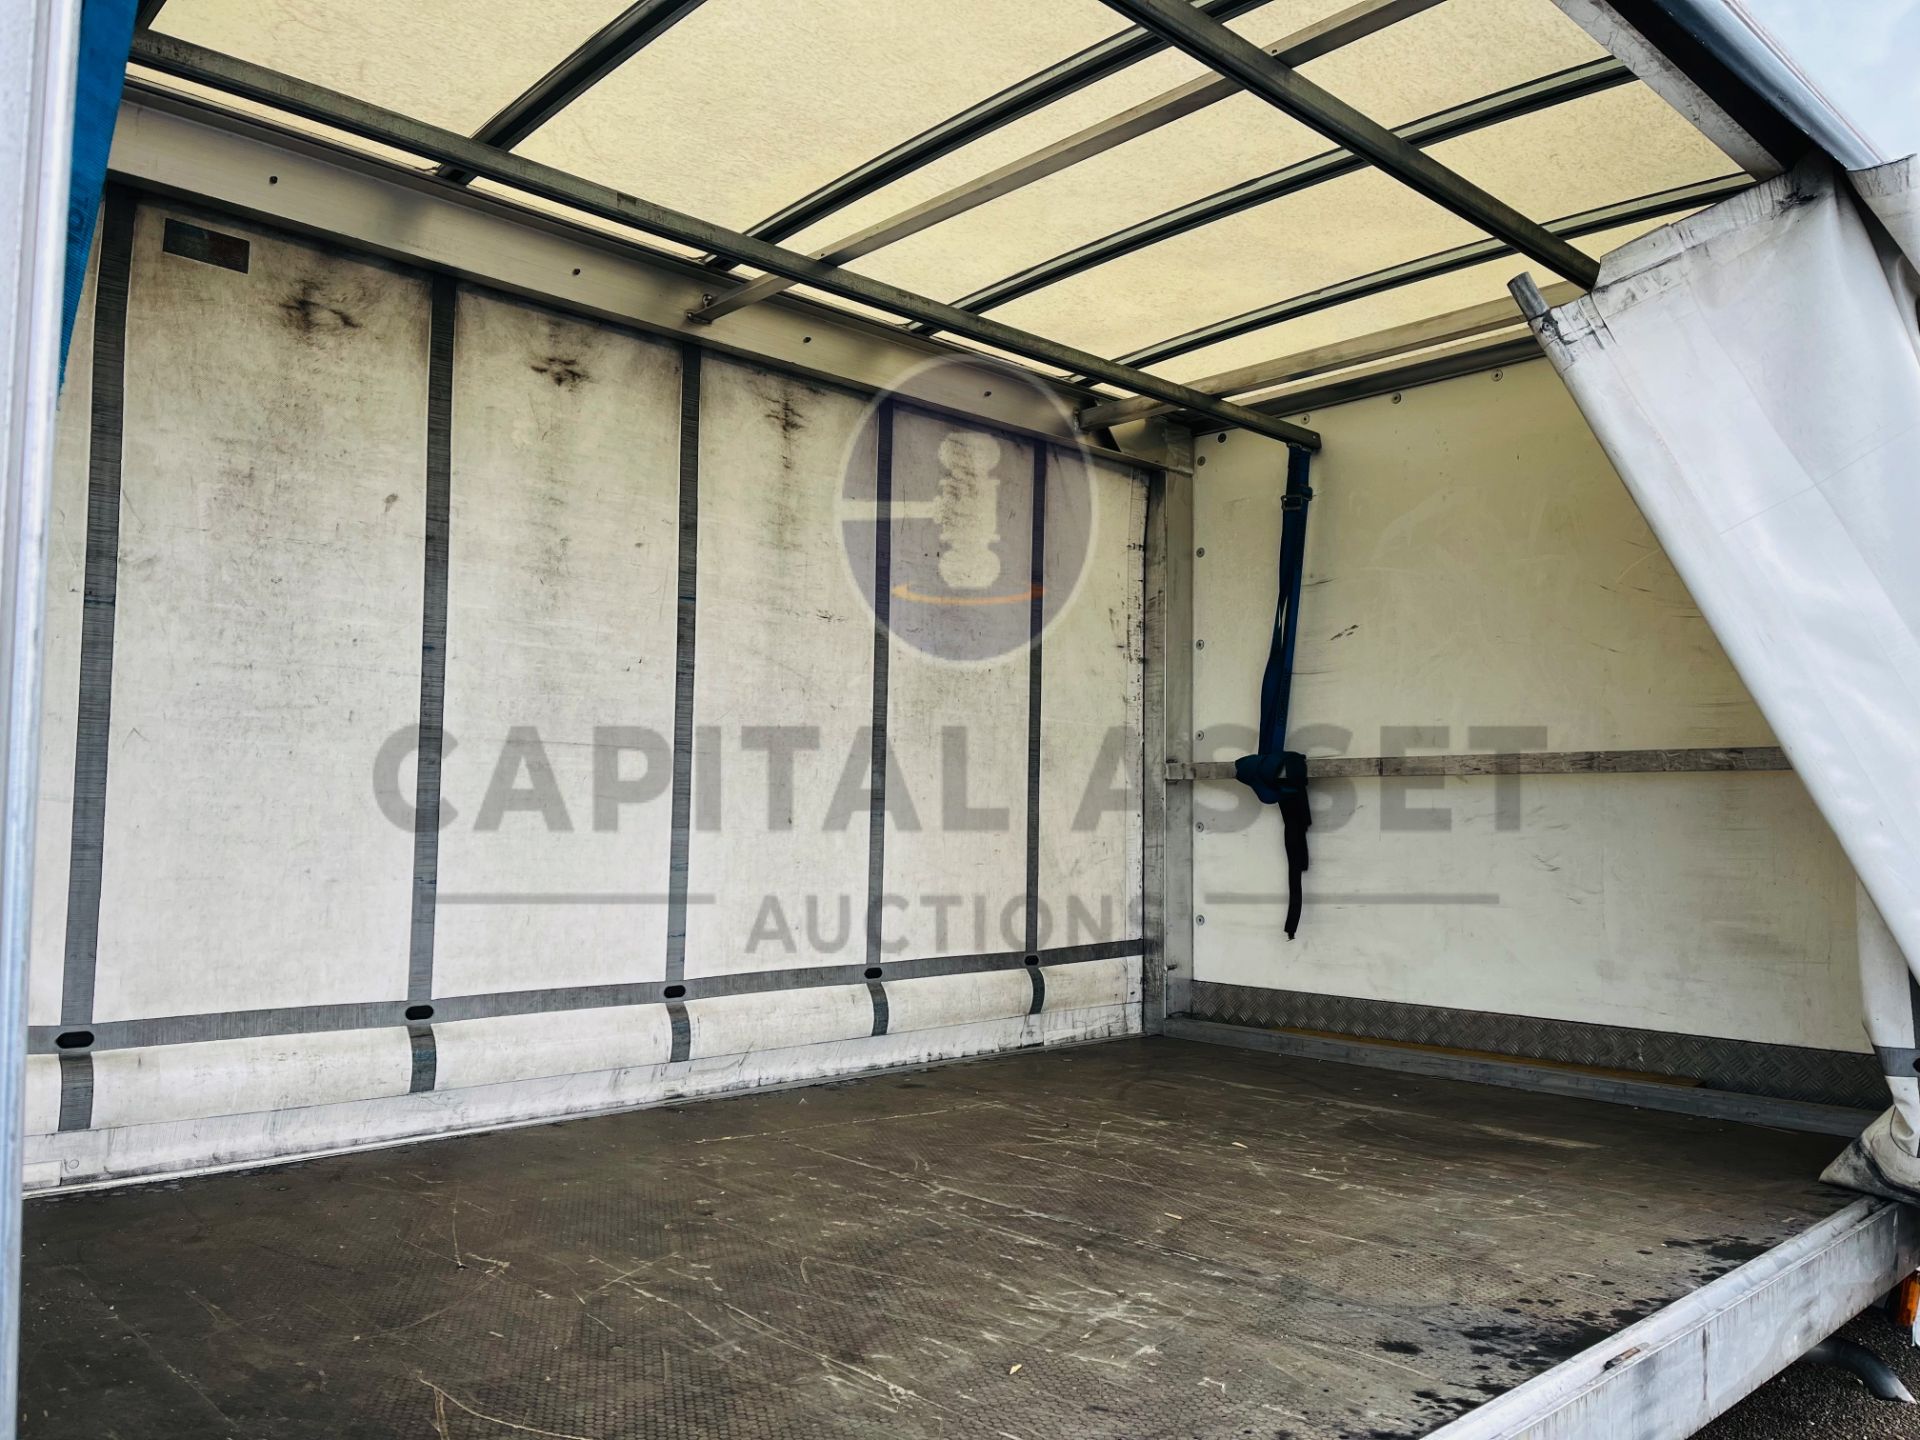 (ON SALE) FIAT DUCATO 2.3 MULTIJET (2019 MODEL) RARE CURTAIN SIDE BODY - 1 OWNER - 360 CAMERA VIEW - Image 24 of 24